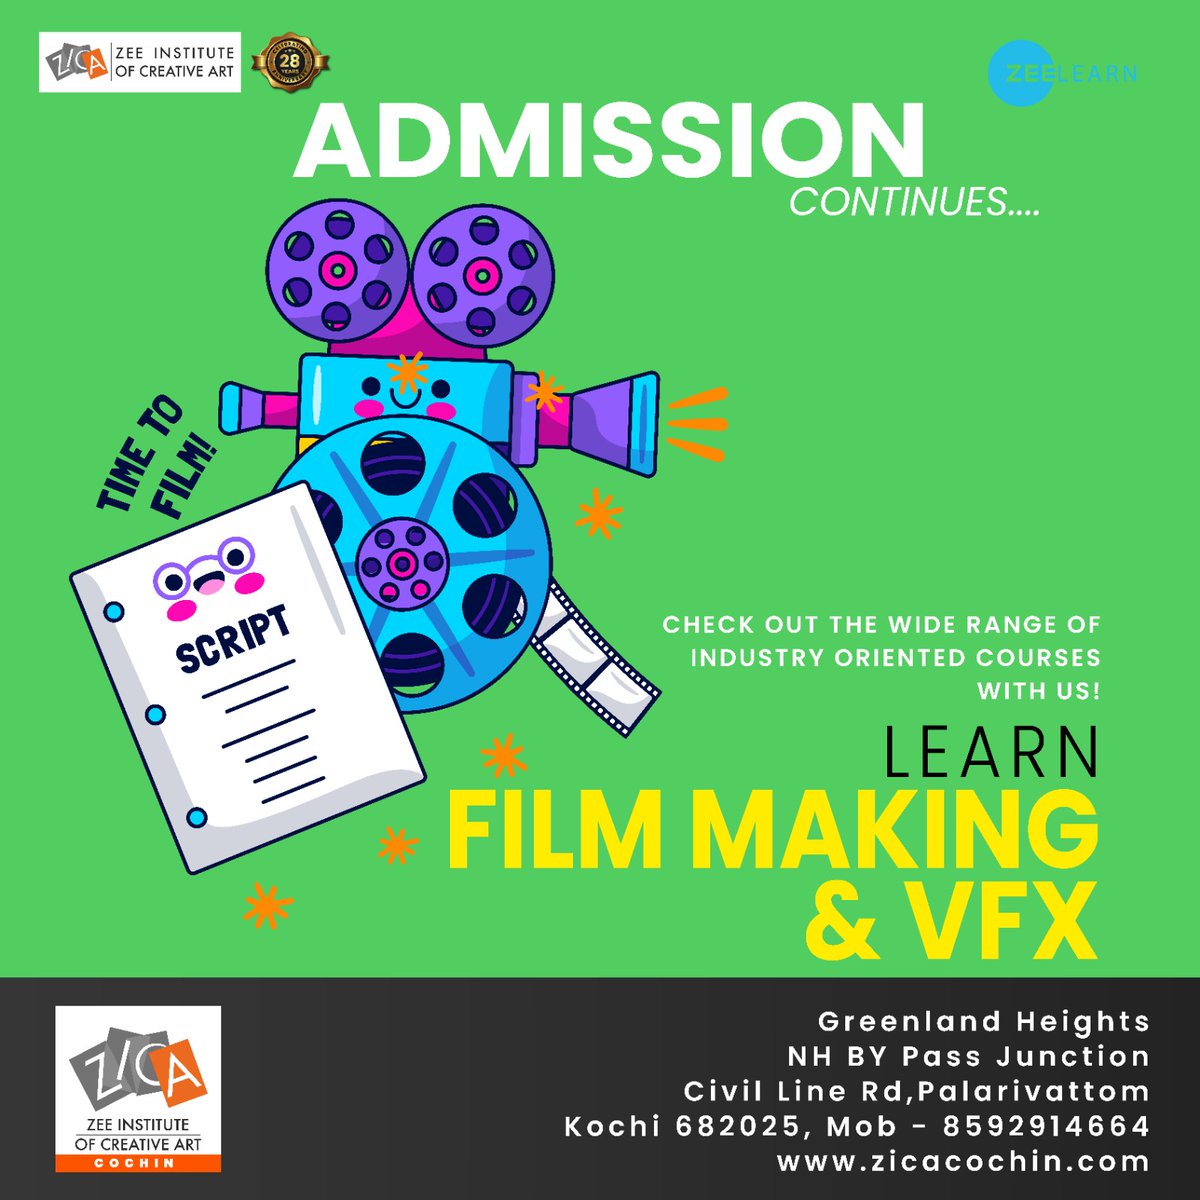 Shape the future of entertainment with ZICA Cochin!
Admissions are now open for Film Making & VFX.🎥🧑‍💻

Zee Institute of Creative Art
Contact us : 8592914664
Visit : zicacochin.com

#creativitymatters  #Graphics #institute
#gameart #films #filmmaking #VFX